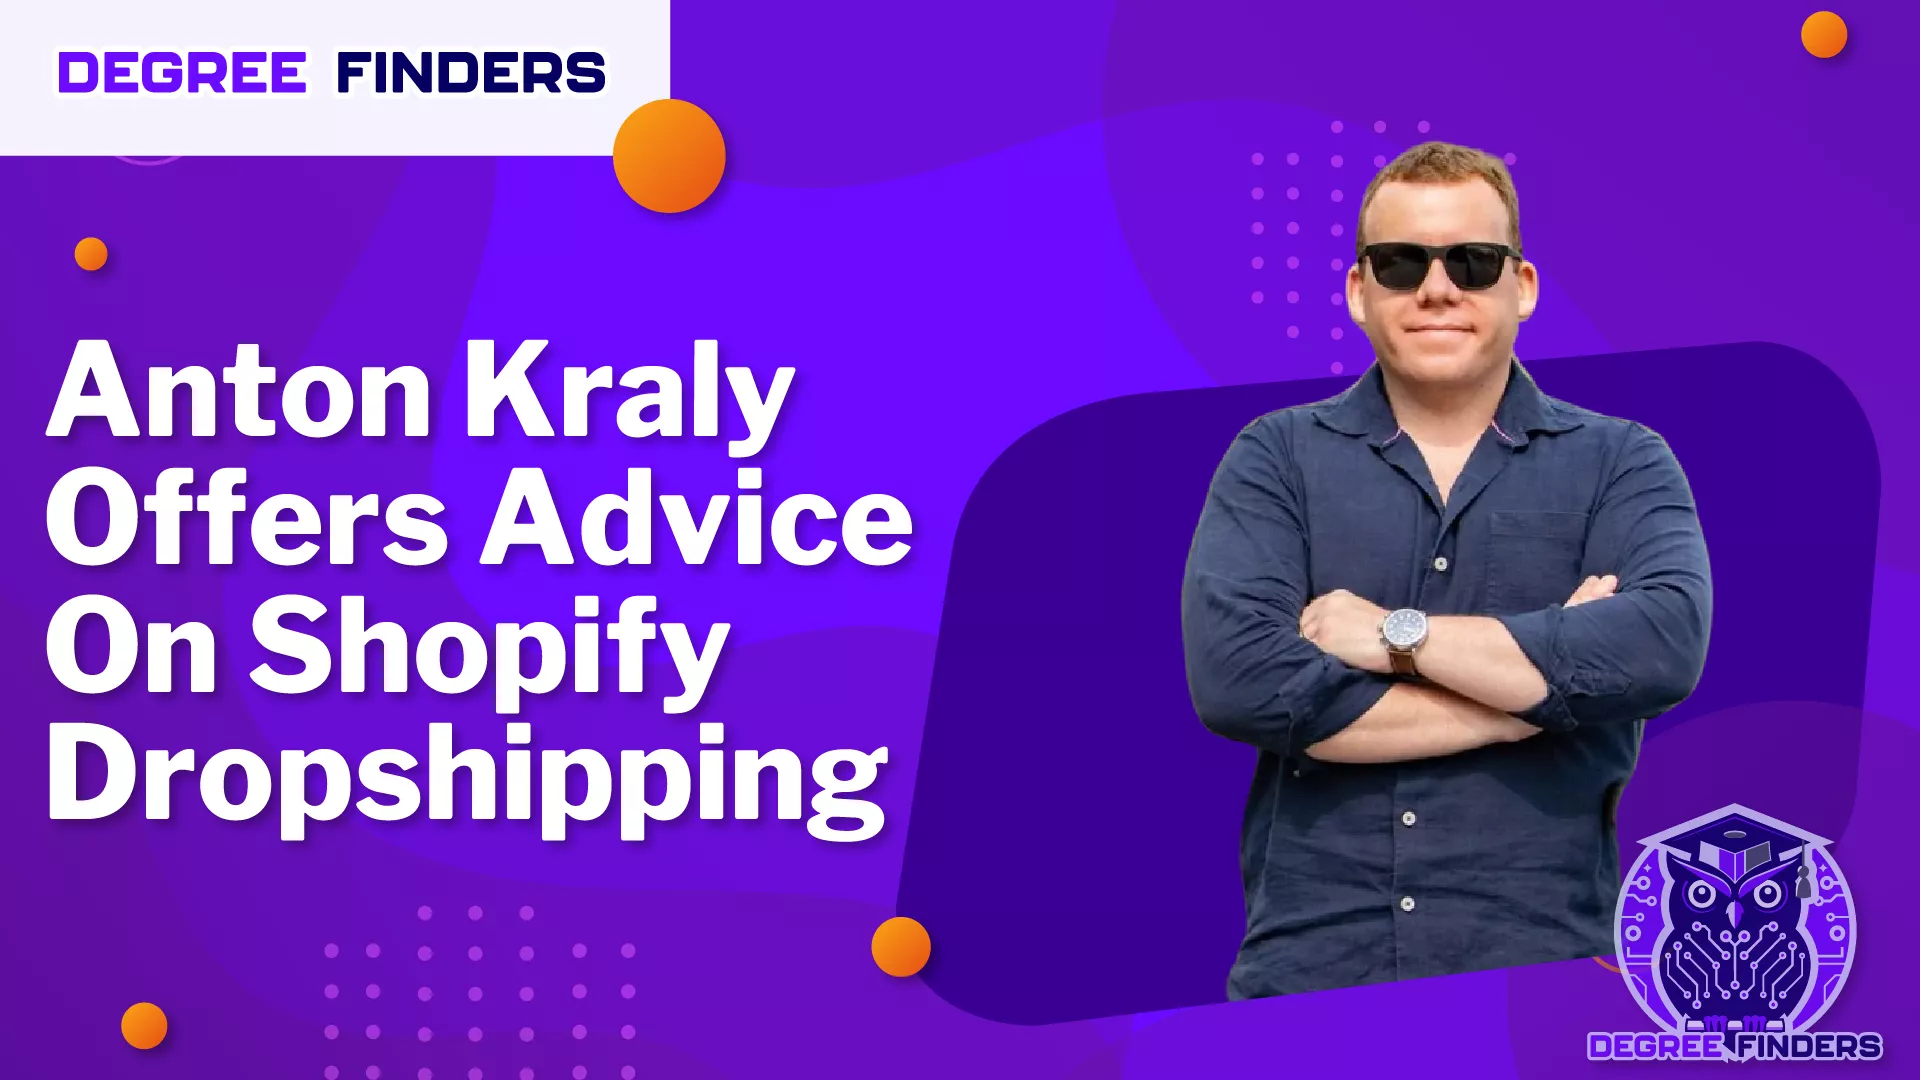 Anton Kraly Offers Advice On Shopify Dropshipping